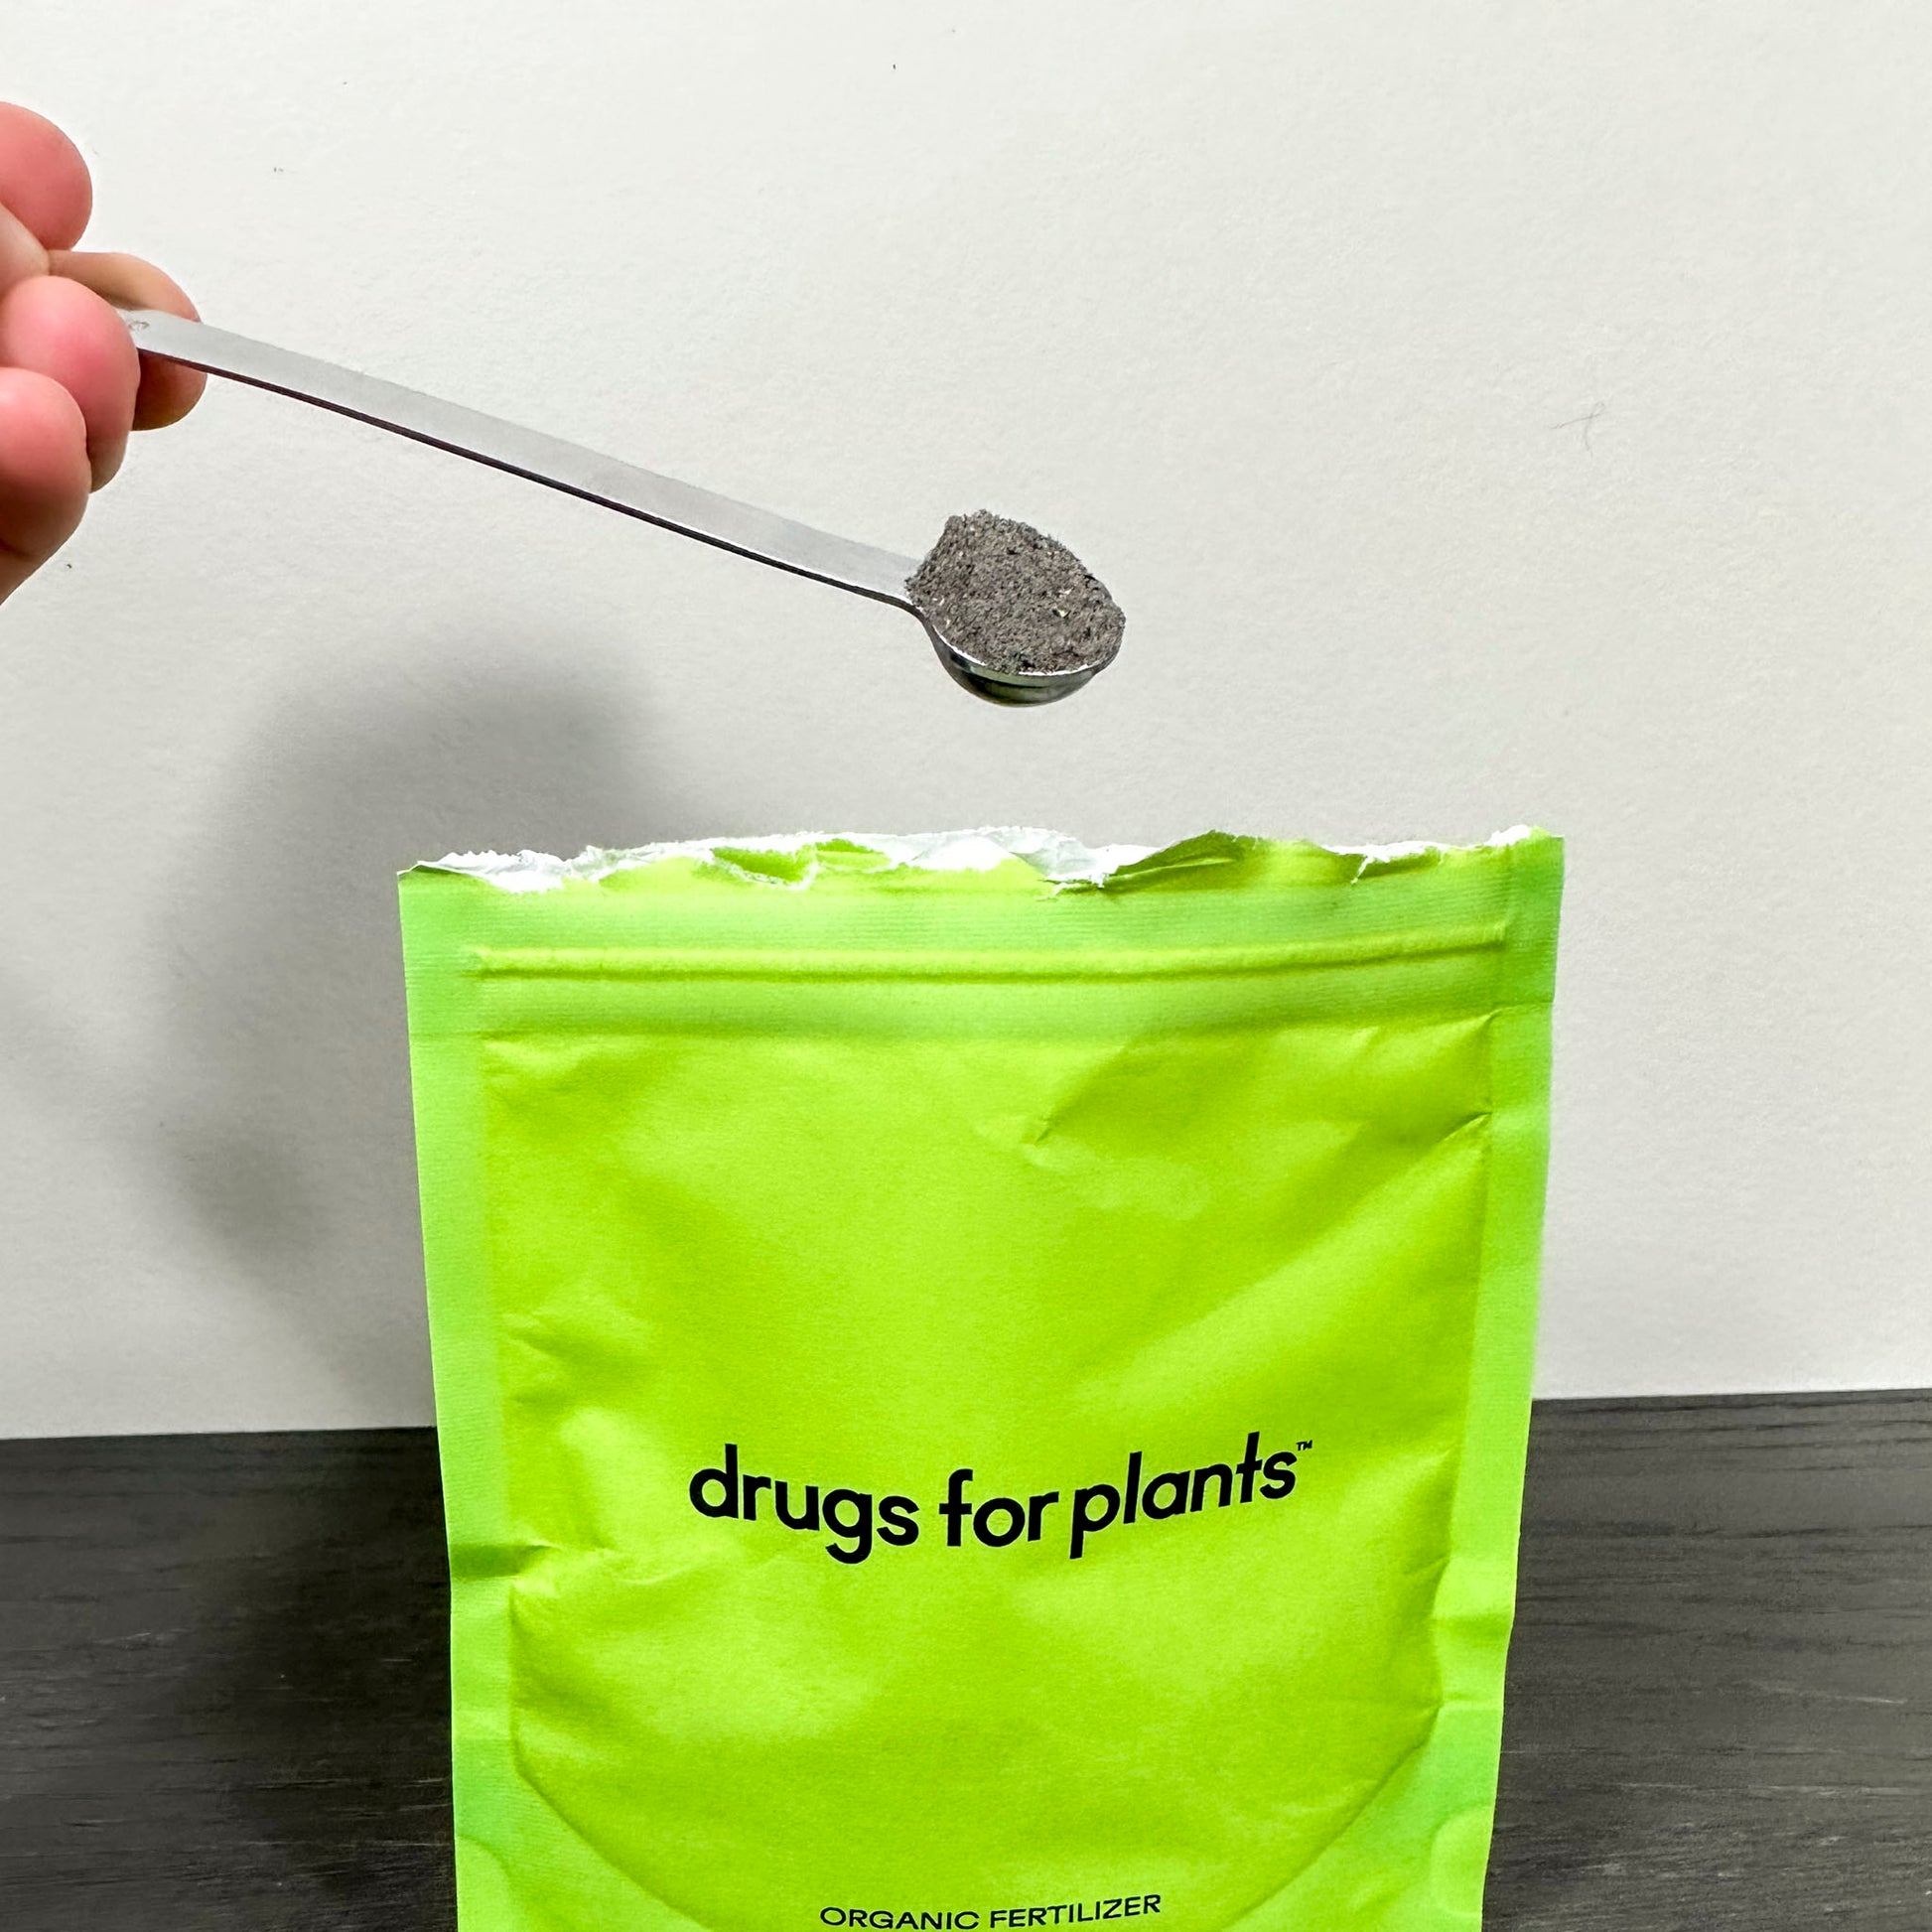 Drugs for plants pouch of fertilizer 28 gram with spoon